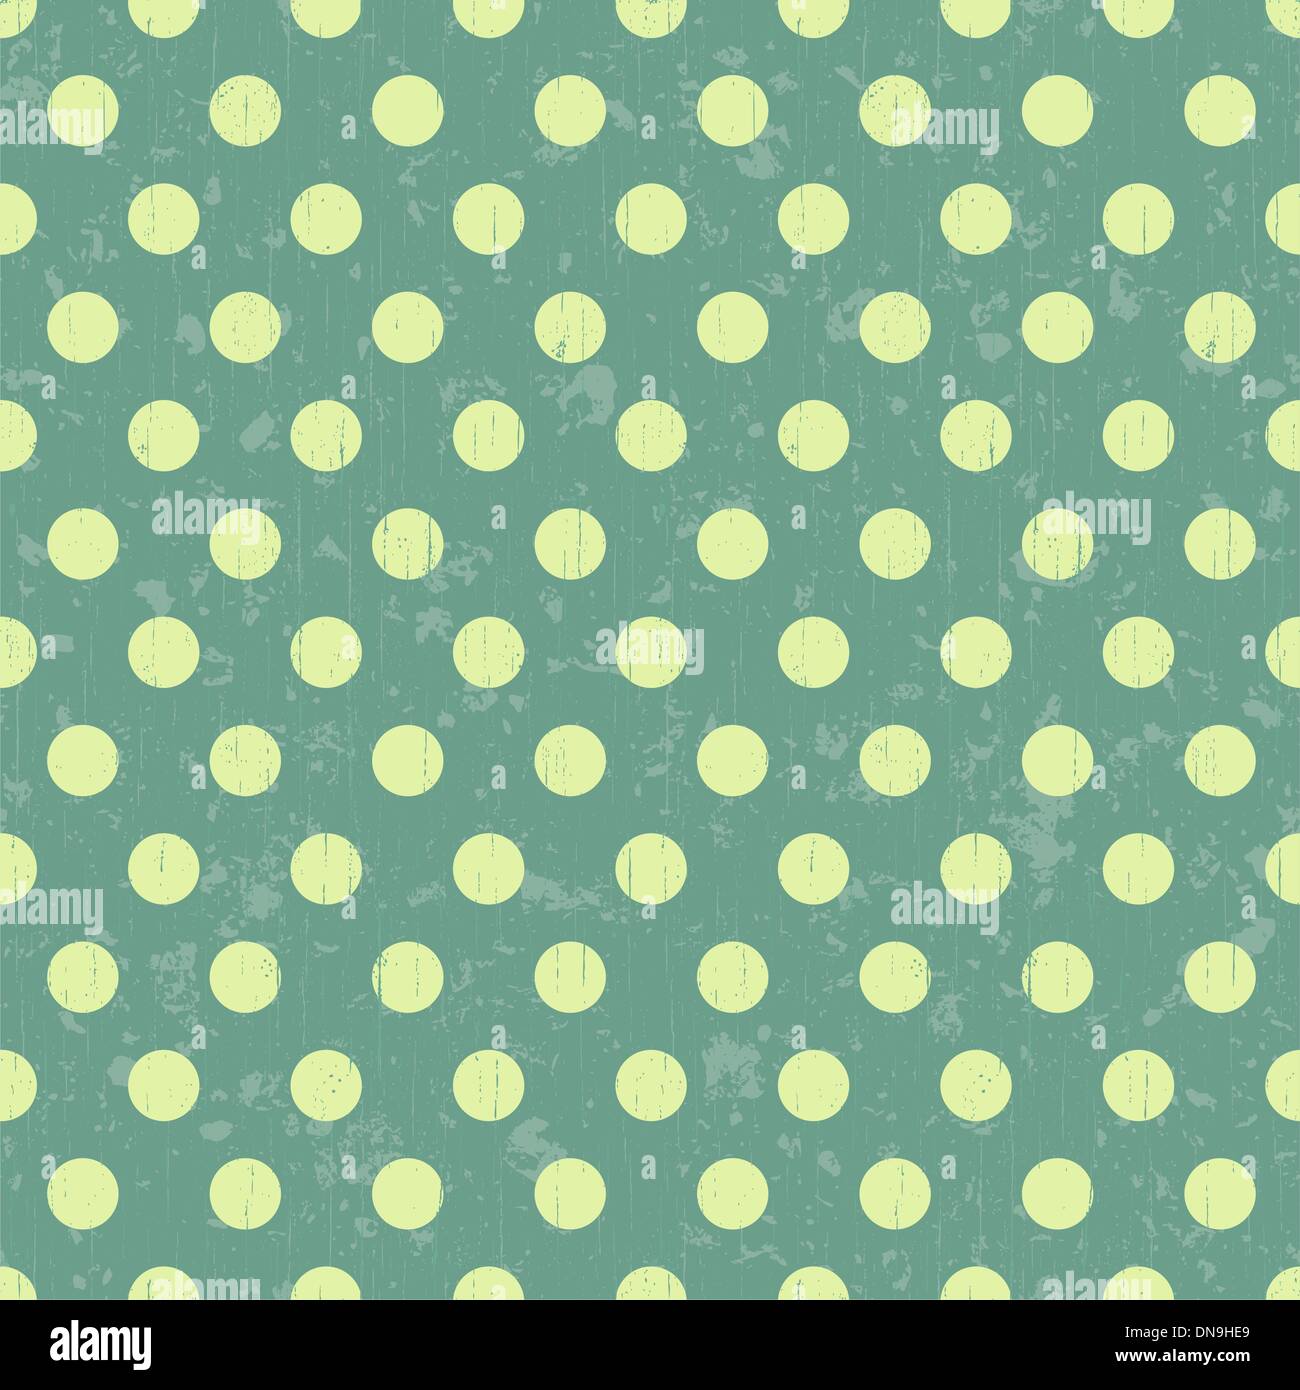 288,706 Polka Dots Seamless Images, Stock Photos, 3D objects